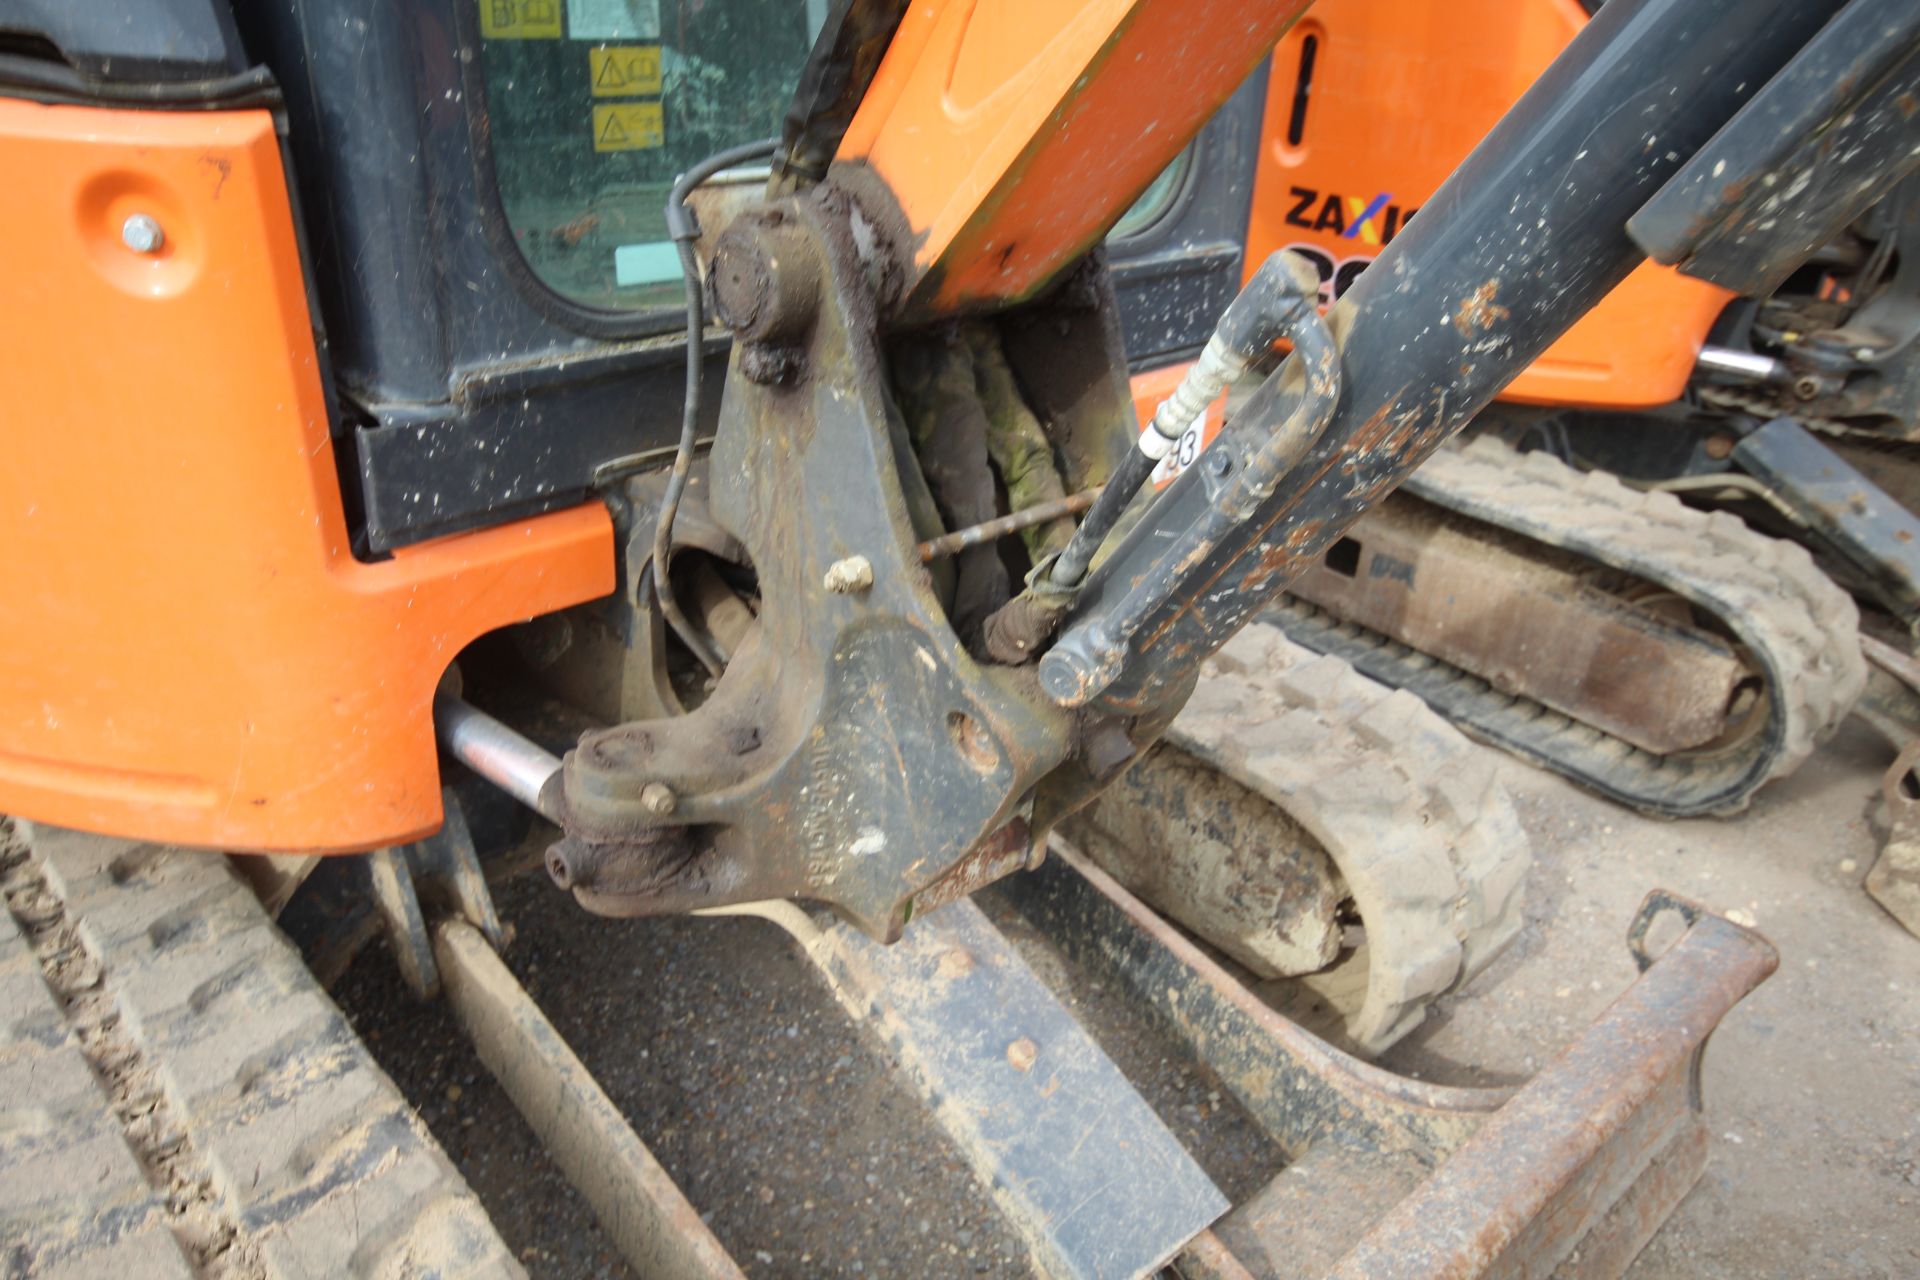 Hitachi Z-Axis 26U-5a 2.6T rubber track excavator. 2018. 2,061 hours. Serial number HCM - Image 14 of 61